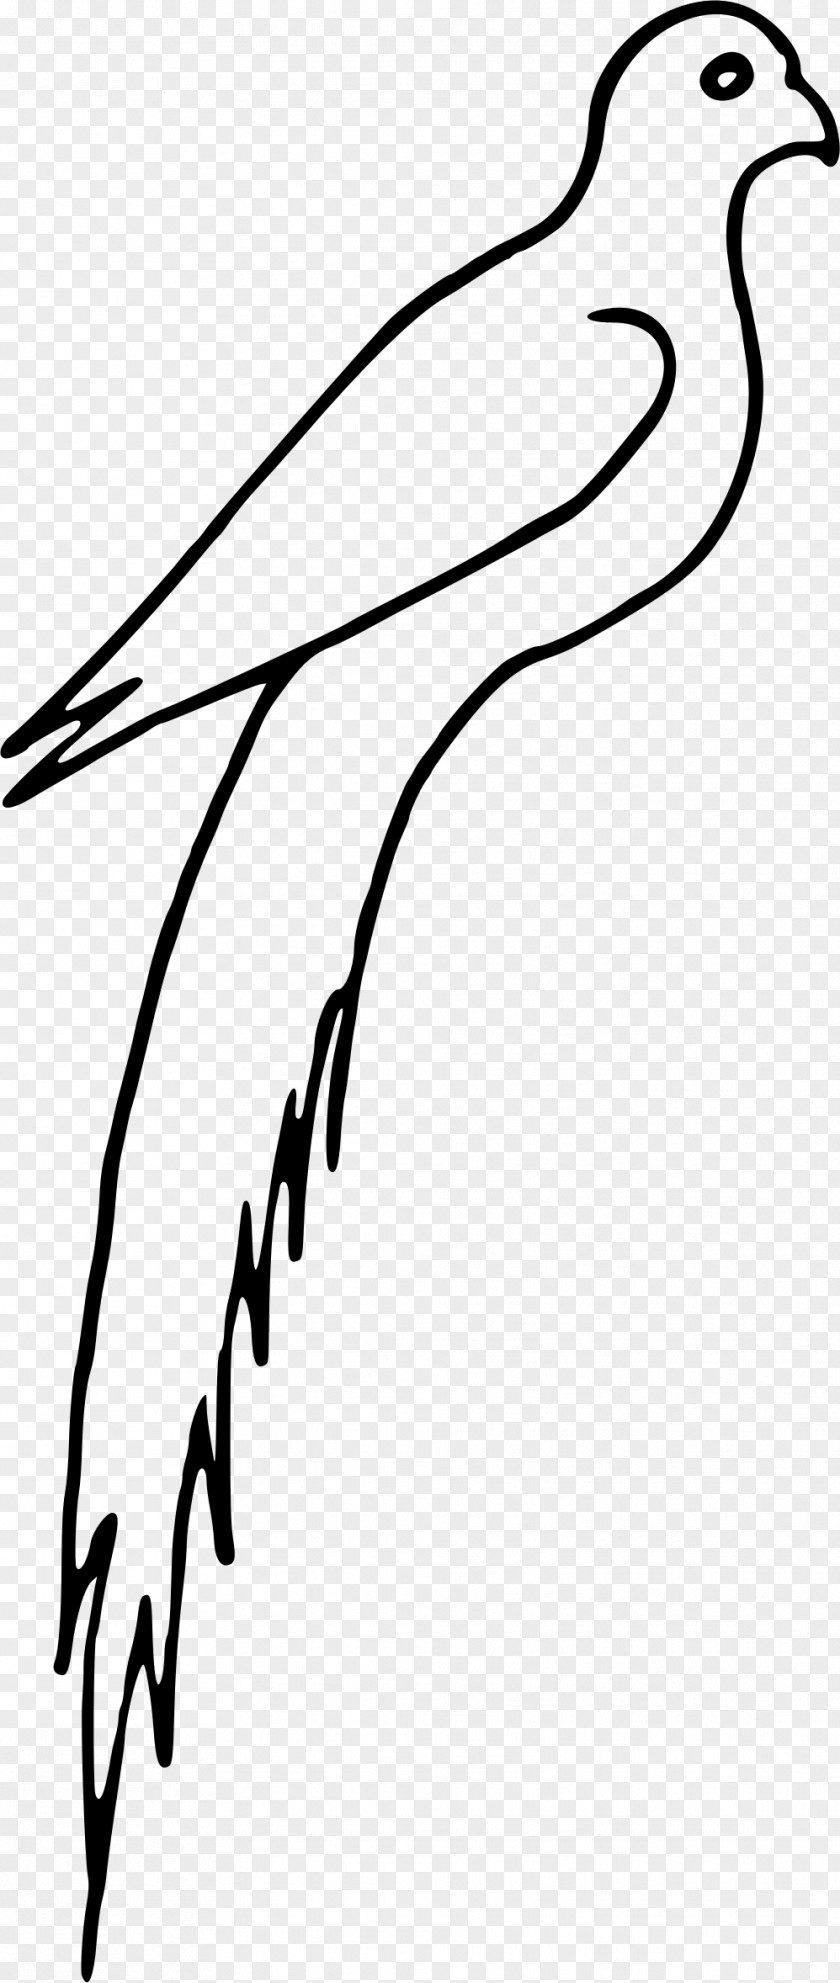 Bird Feathers Beak Feather Black And White Clip Art PNG